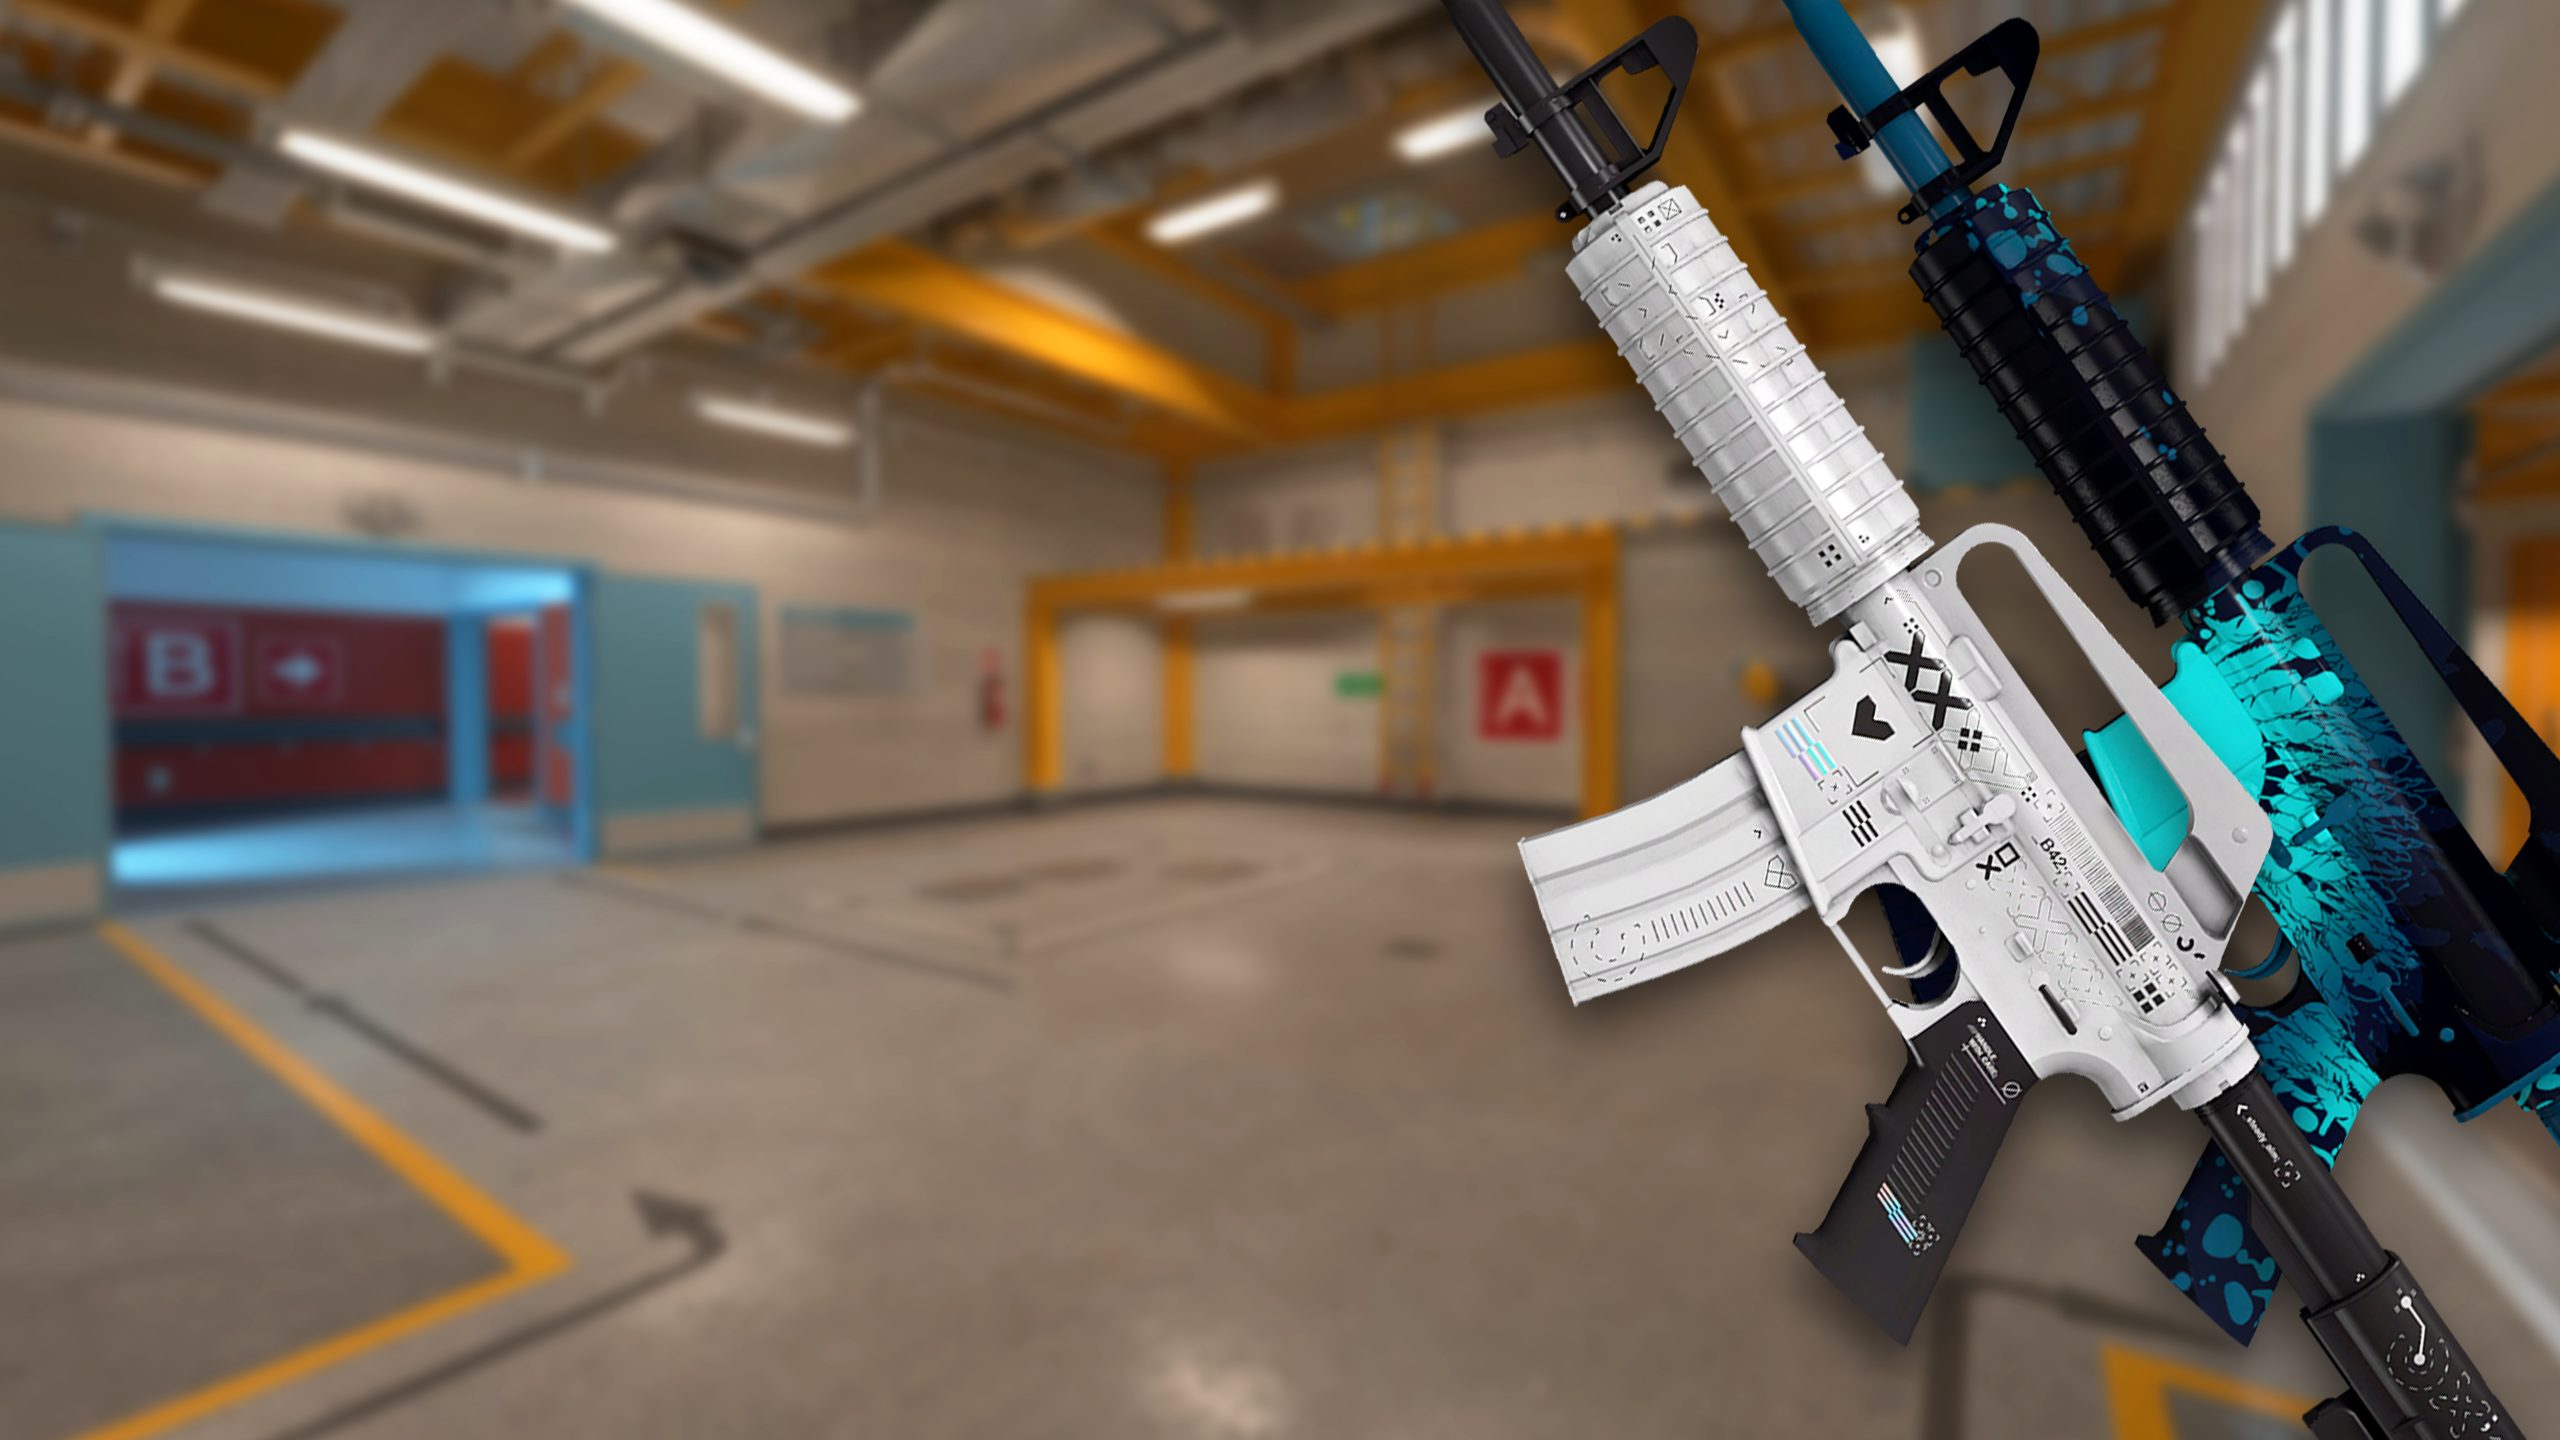 The Best Cheap M4A1-S Skins in CS:GO, DMarket